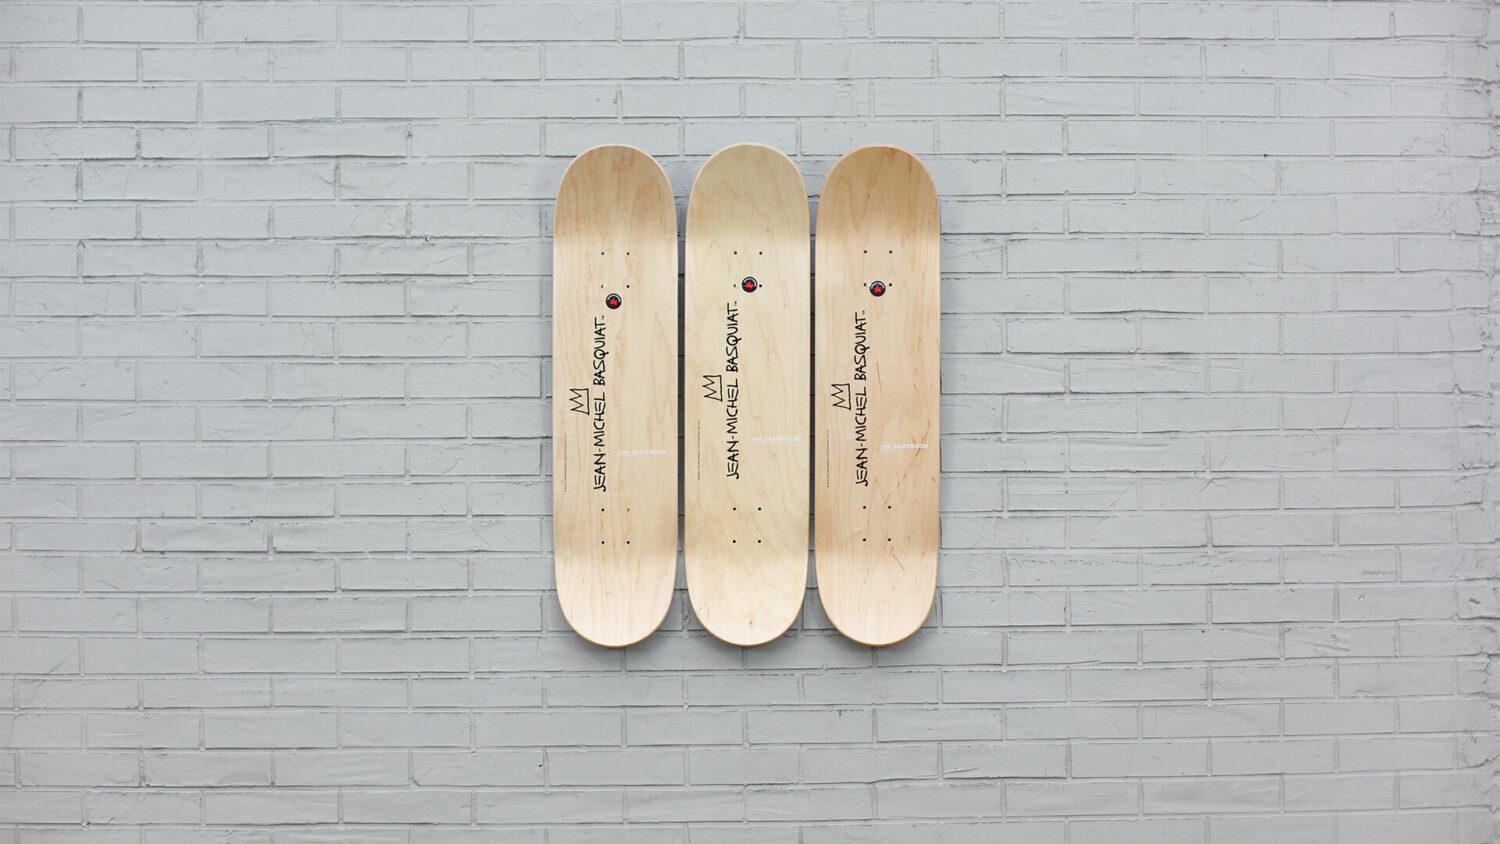 The Skateroom x Estate of Jean-Michel Basquiat
Trumpet Skateboard Decks, set of three works, 2019
Screen Print on 7-ply Canadian Maple Wood.
31 1/2 × 8 in  80 × 20.3 cm
Open edition 
Licensed by Artestar, New York